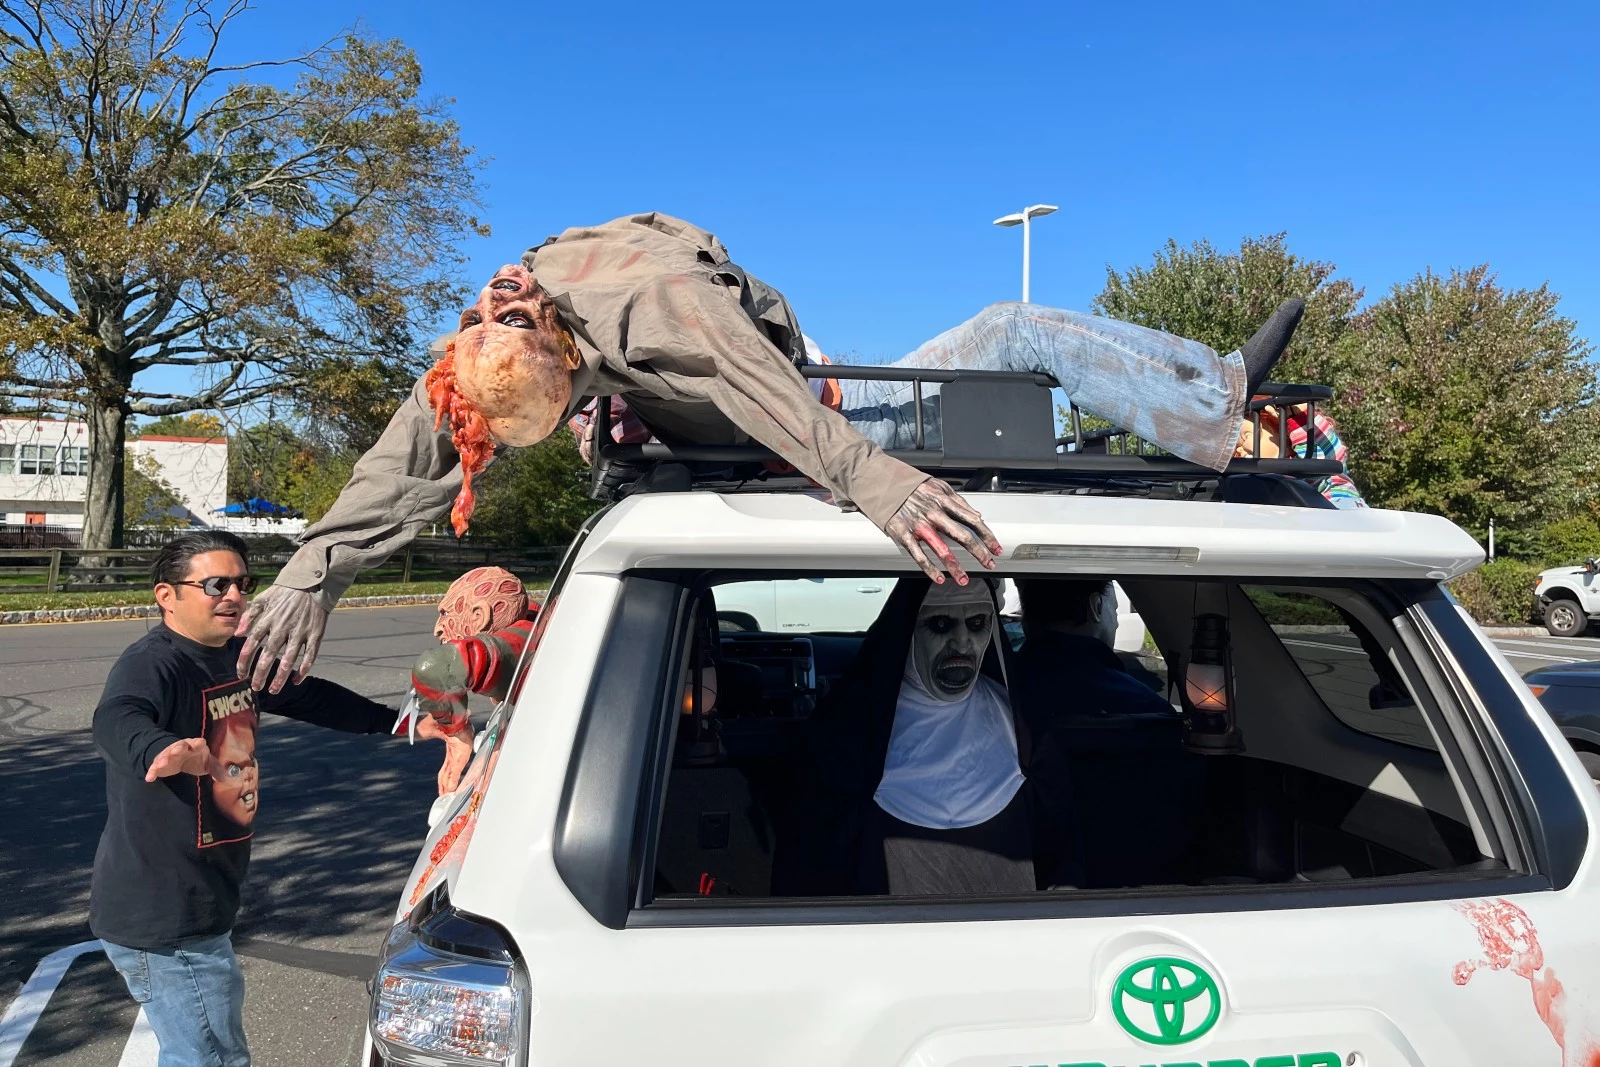 The creepiest Halloween car in NJ belongs to a guy from Somerset pic